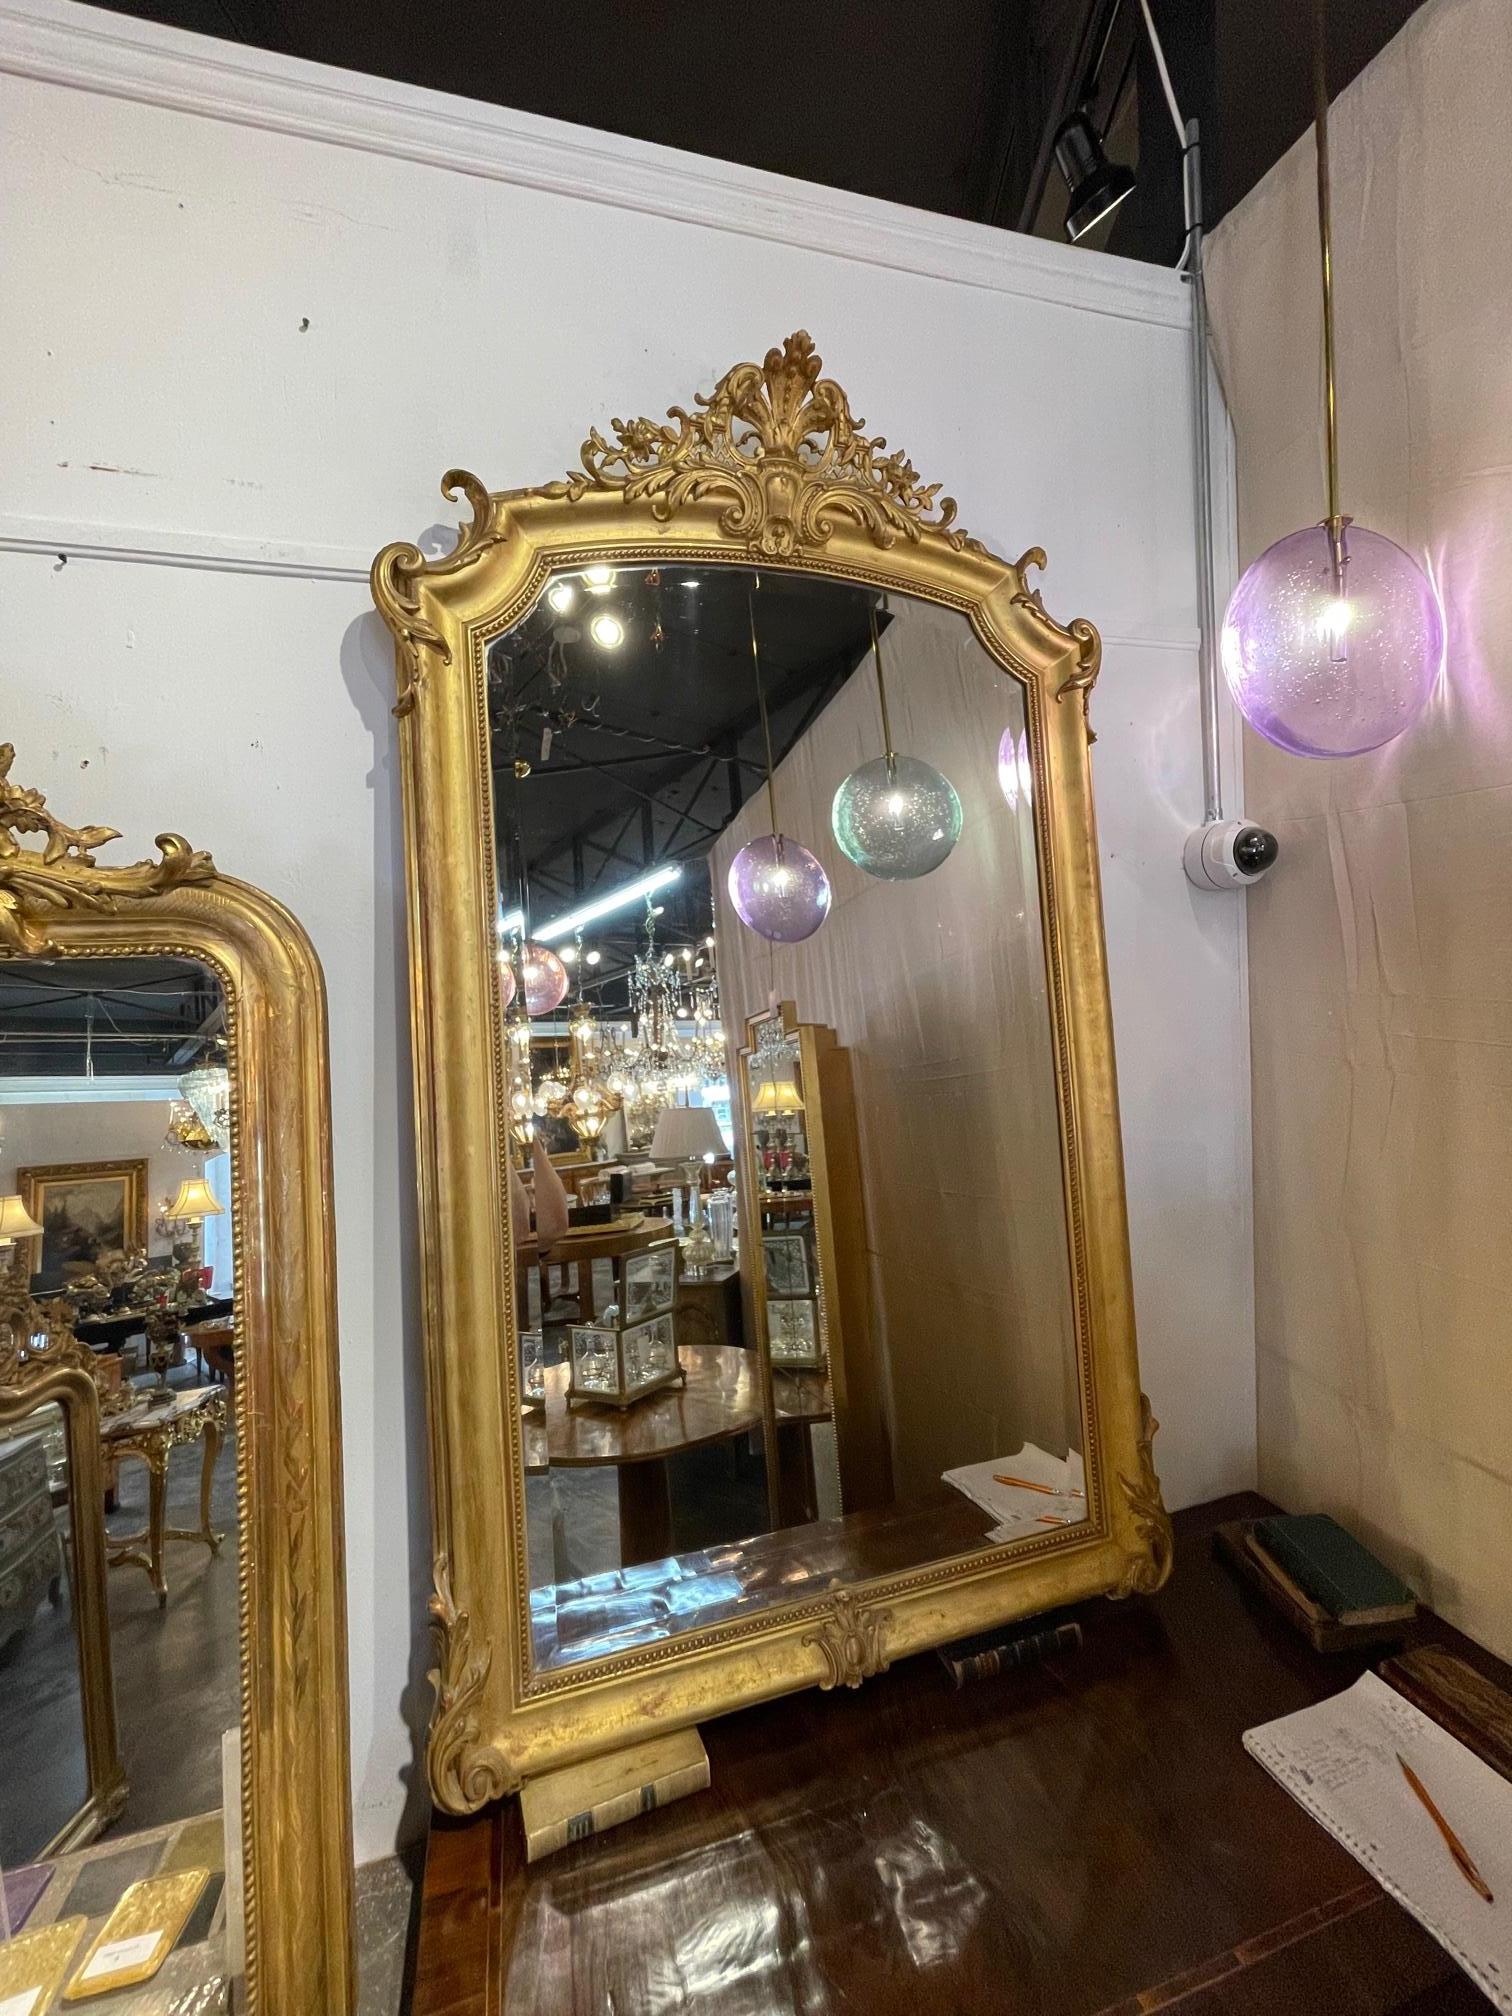 19th century French transitional giltwood mirror. Circa 1870. This is a fine quality mirror that is sure to make a statement.